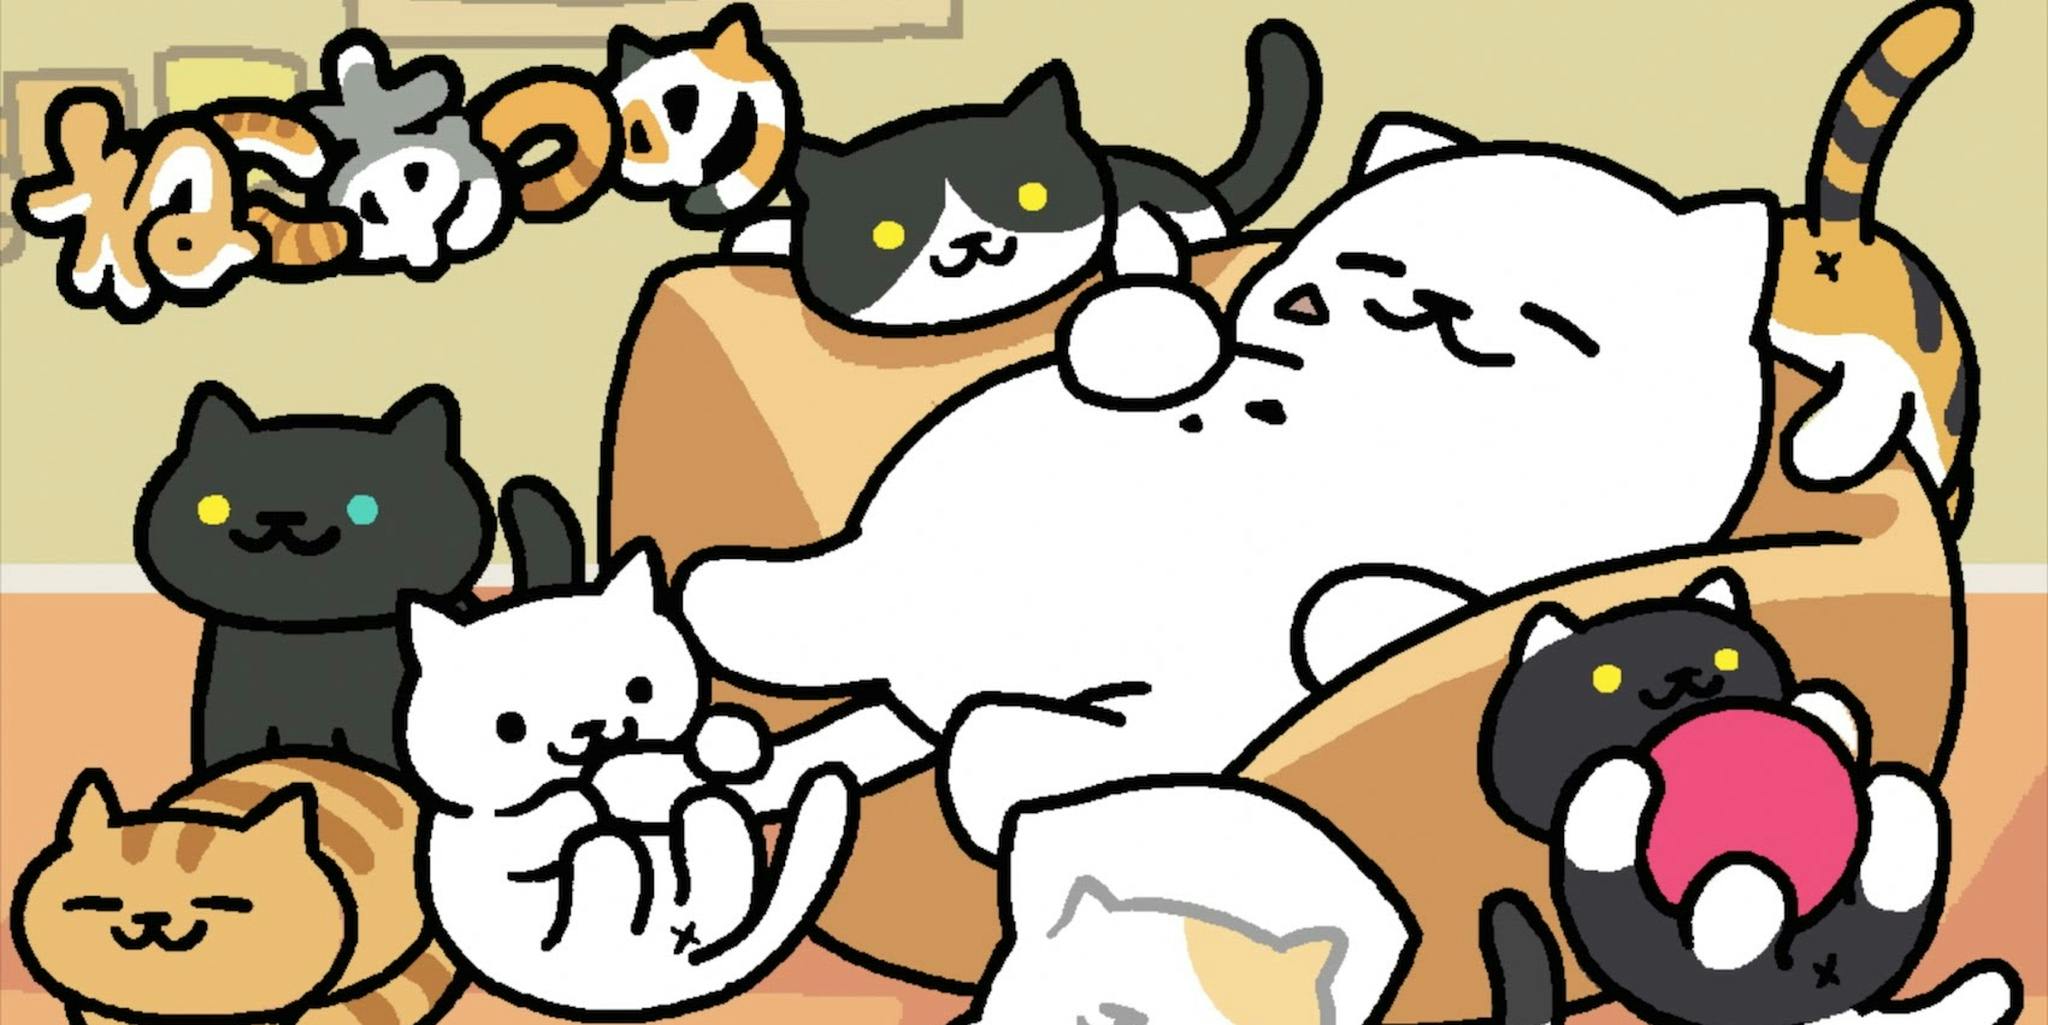 The New York Times on X: He's obsessed with Neko Atsume: Kitty  Collector, a cellphone game about collecting cats    / X